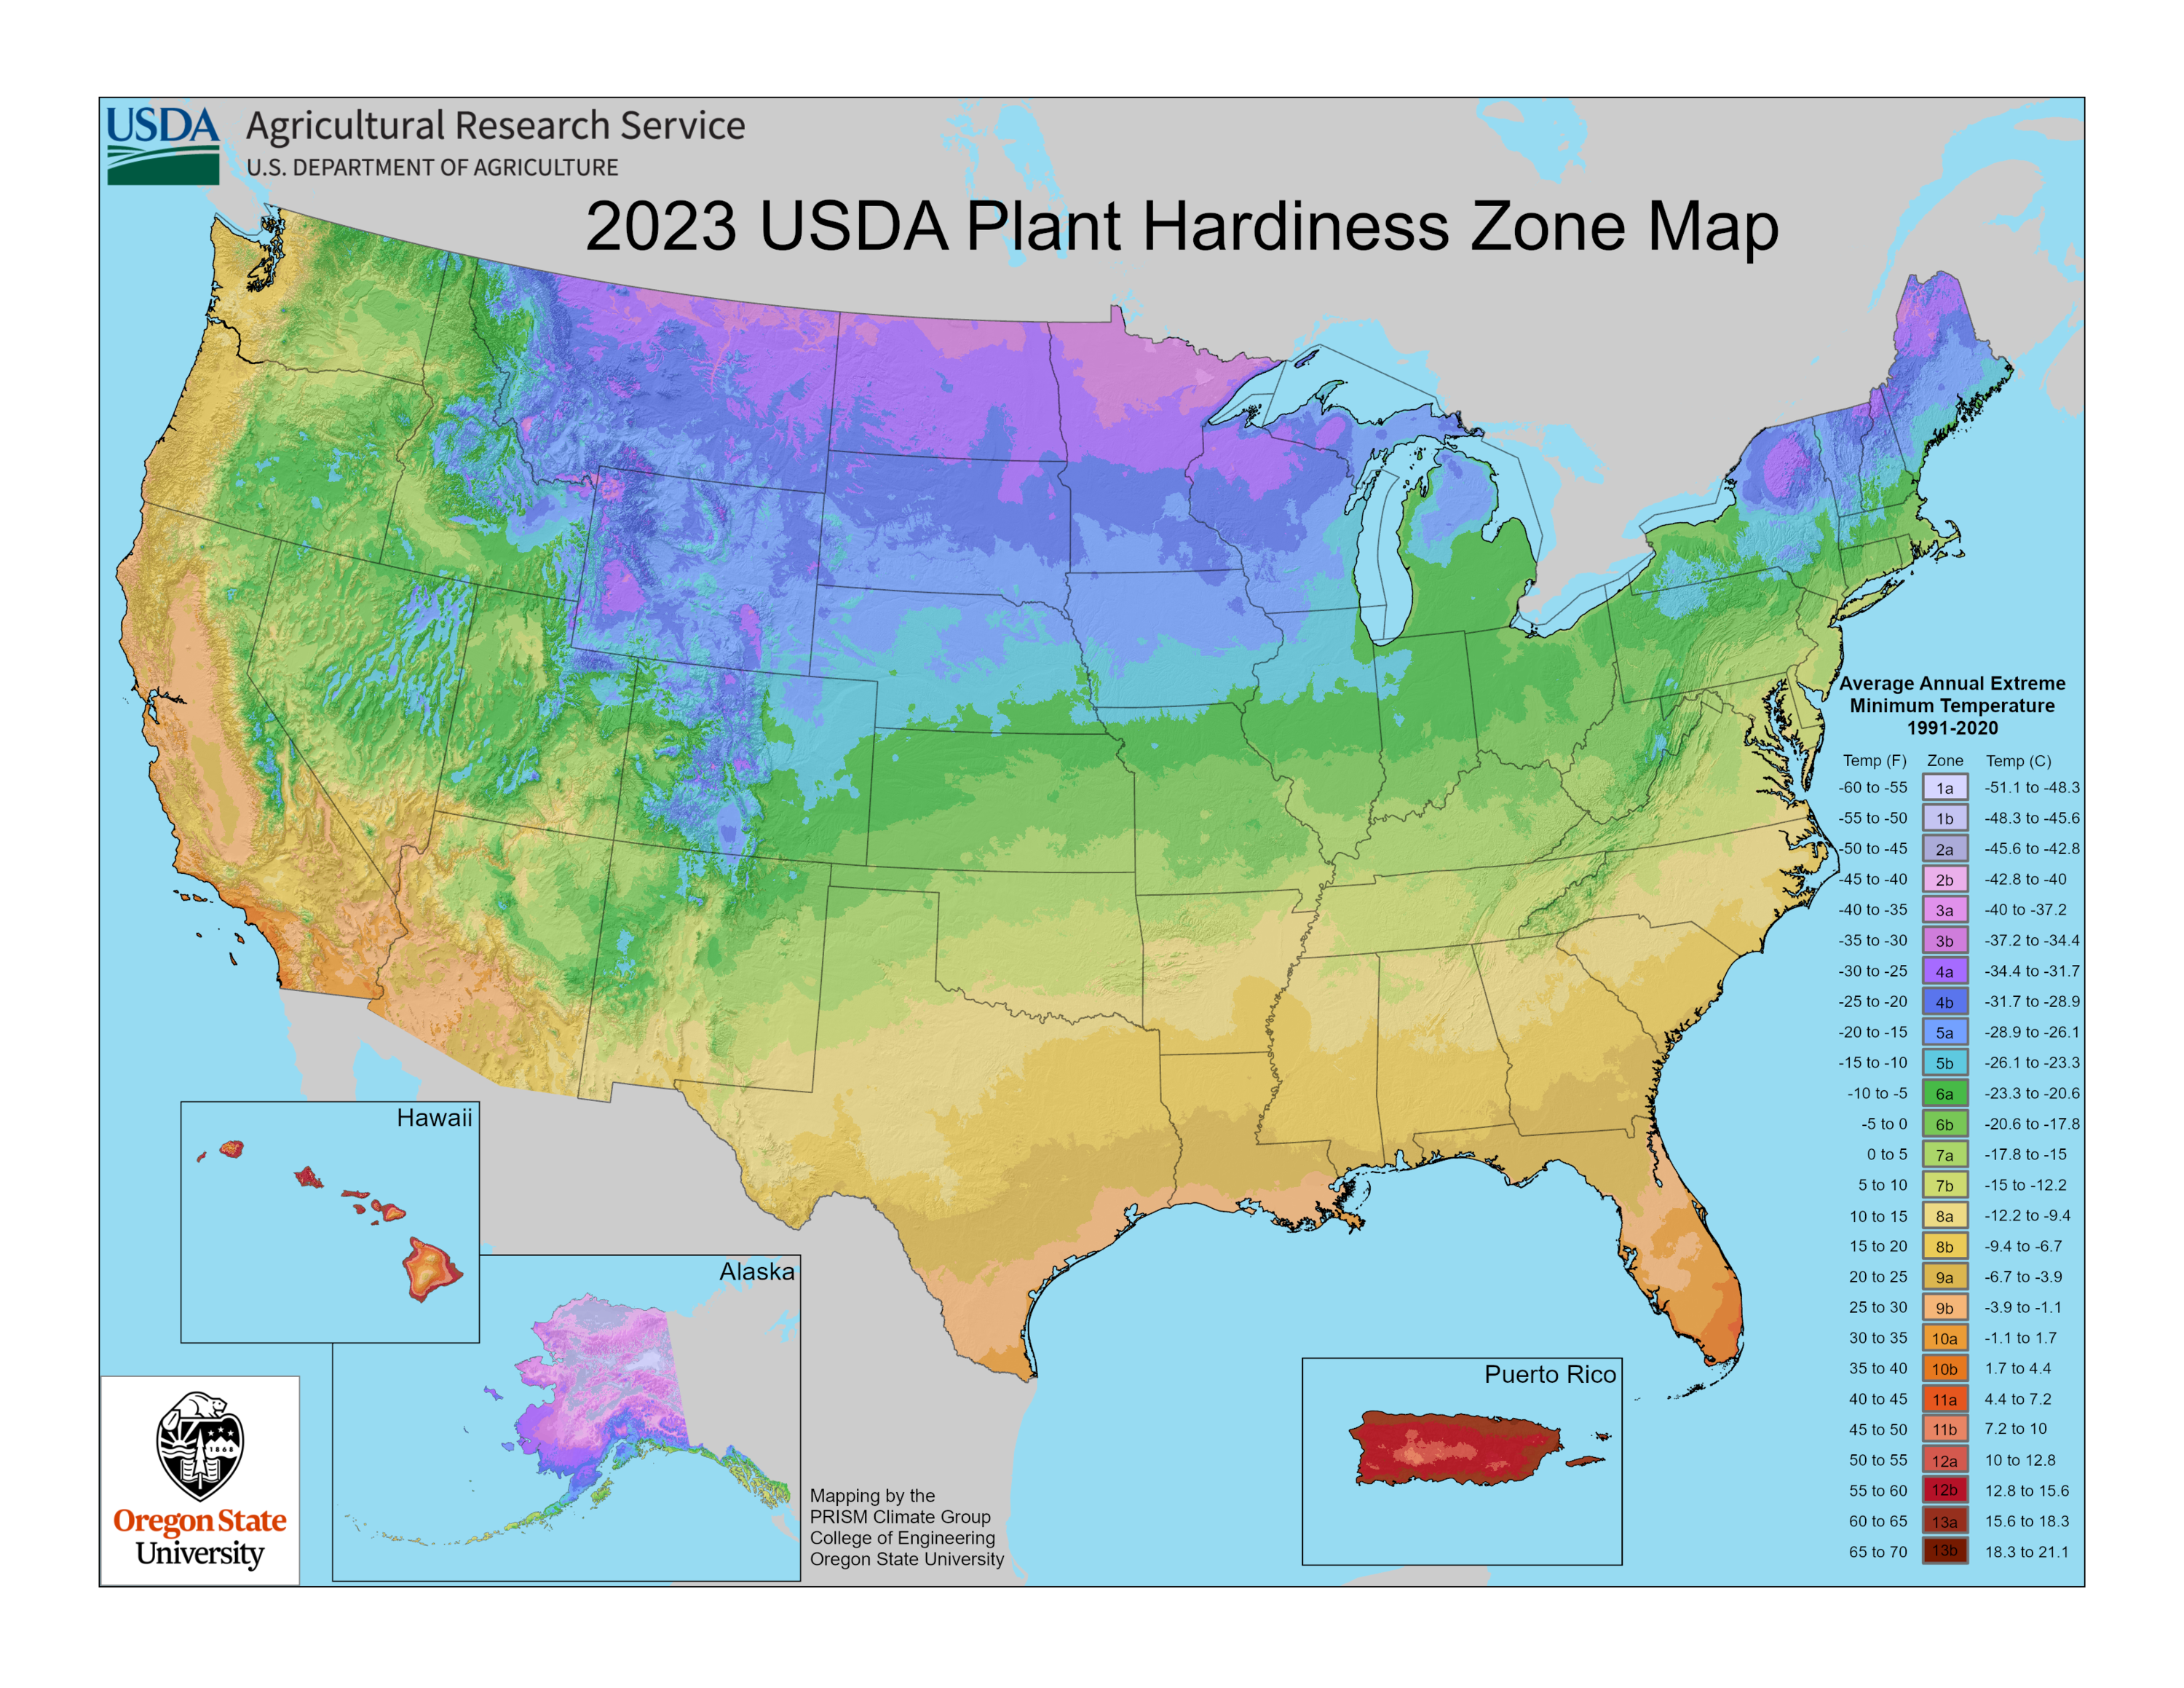 The new 2023 USDA Plant Hardiness Zone Map for the United States. Individual state maps can be found on the USDA Plant Hardiness Website.